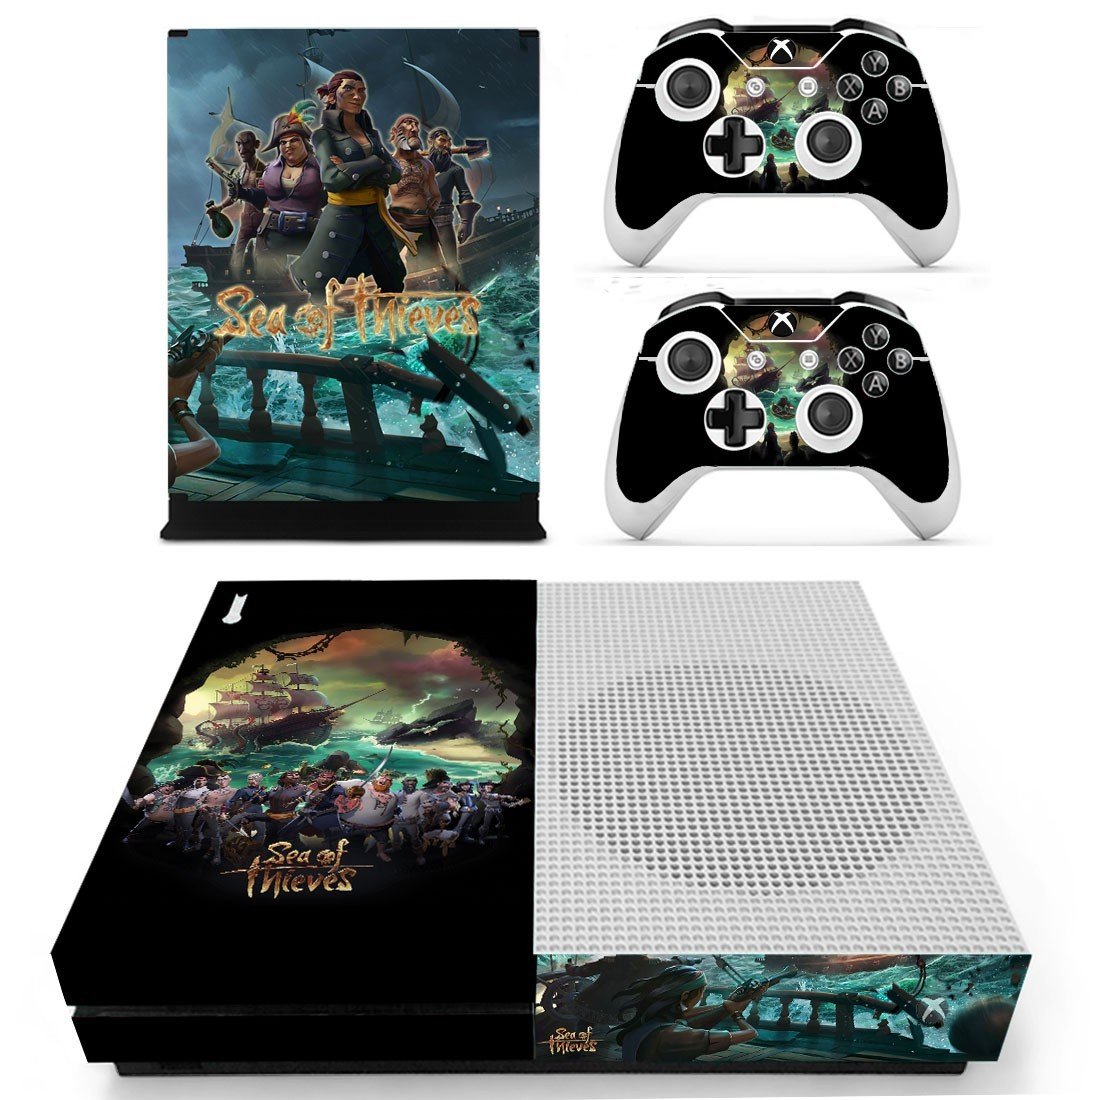 Sea of Thieves Sticker For Xbox One S And Controllers